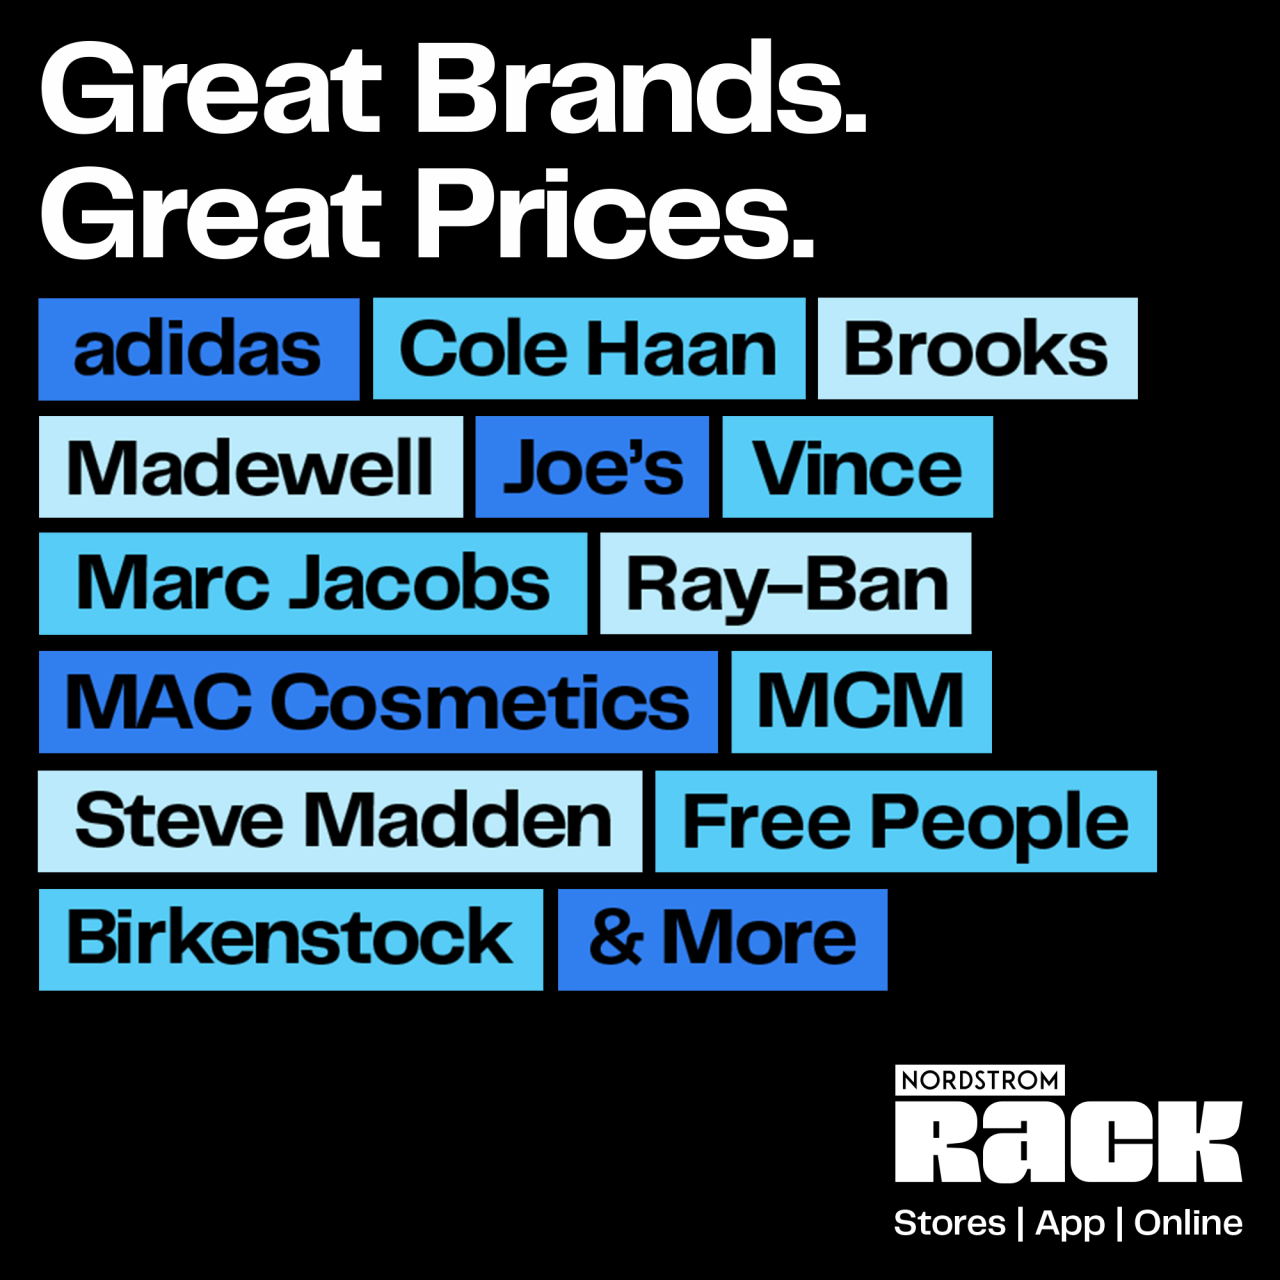 Great Brands. Great Prices.